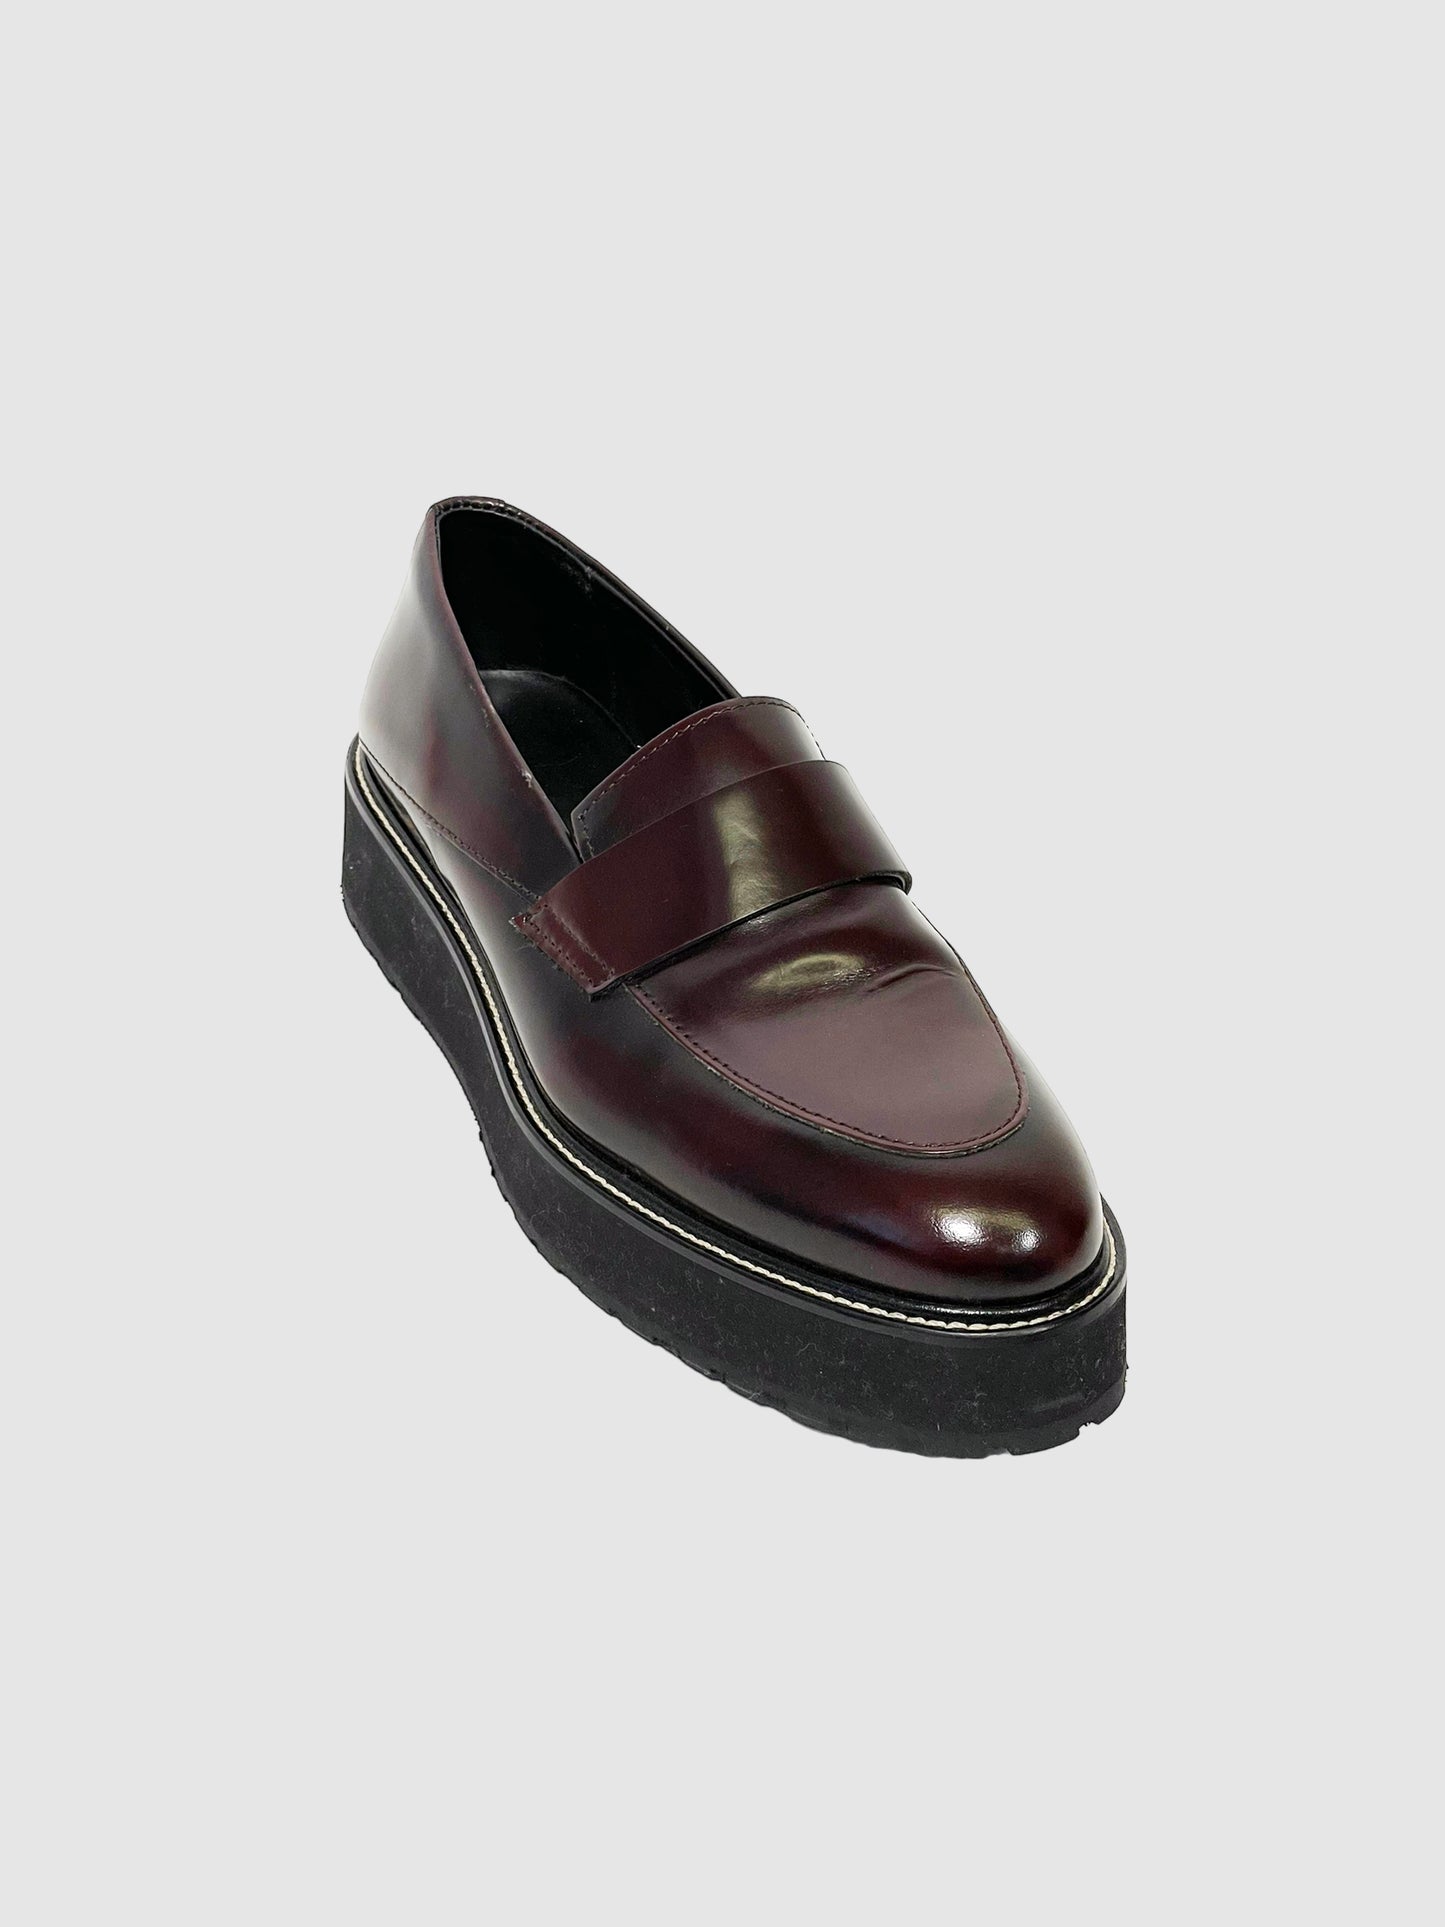 Want Les Essentiels Loafers - Size 37